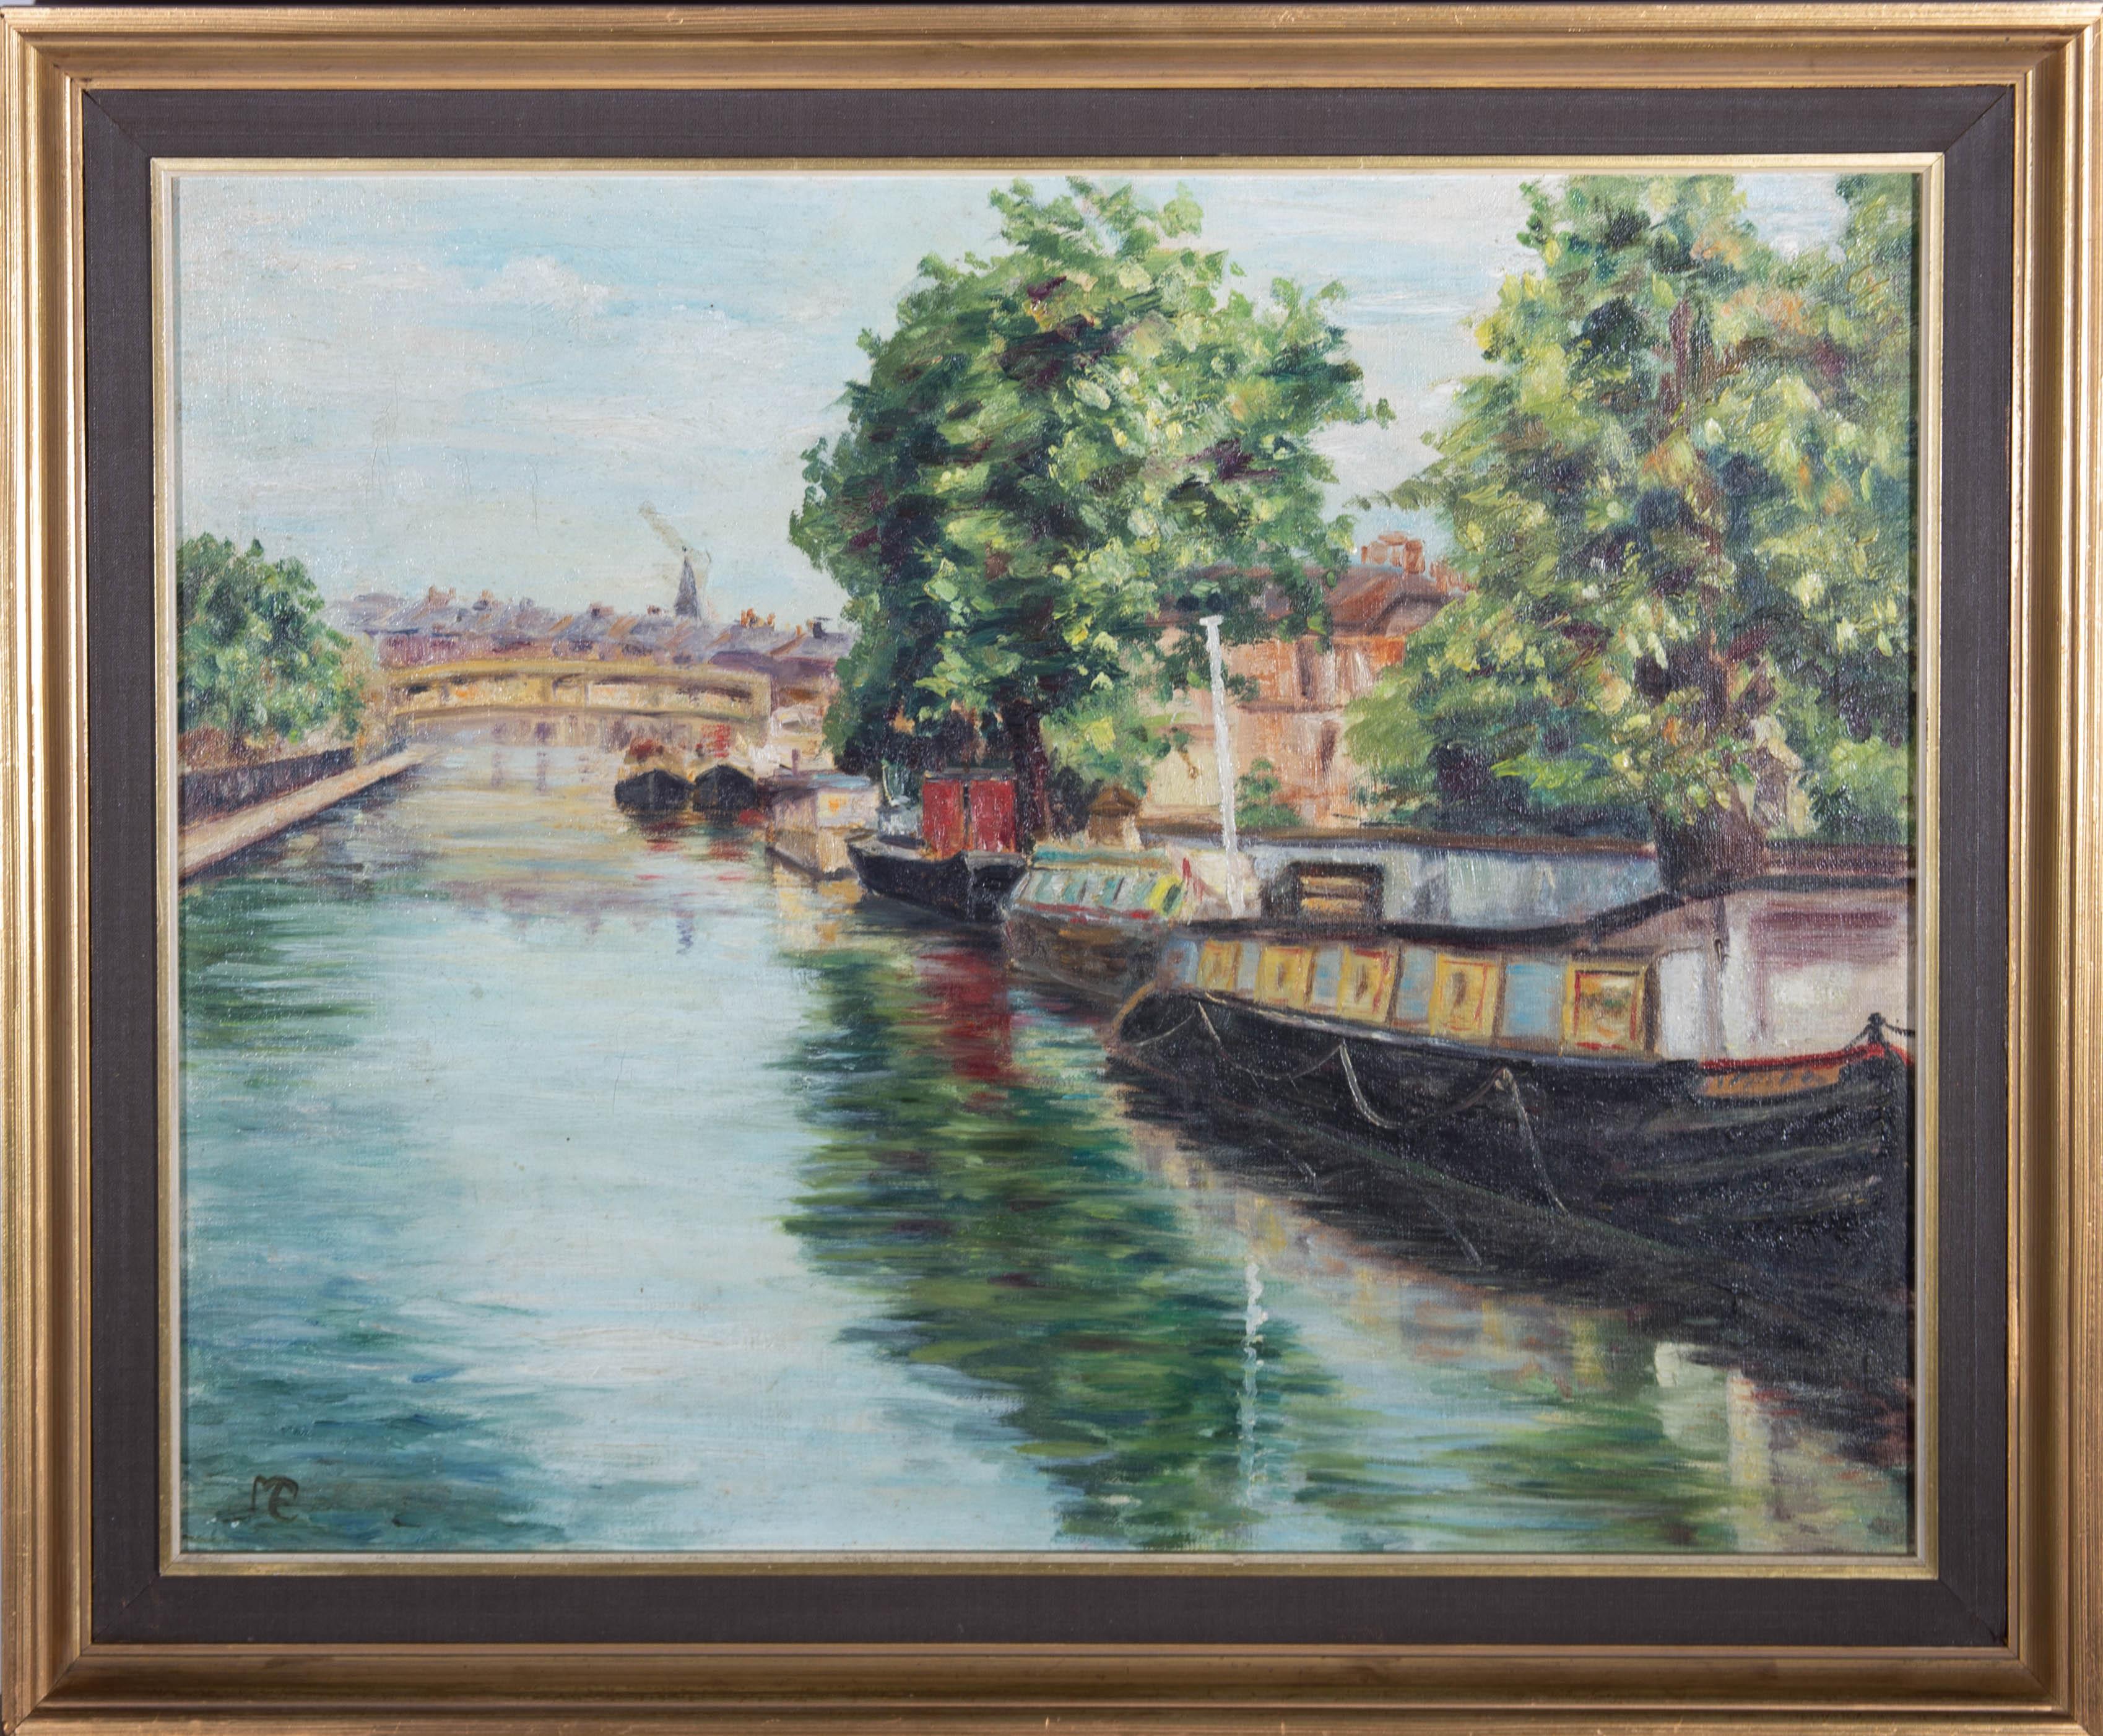 M. Eversfield - 20th Century Oil, The canal at 'Little Venice'